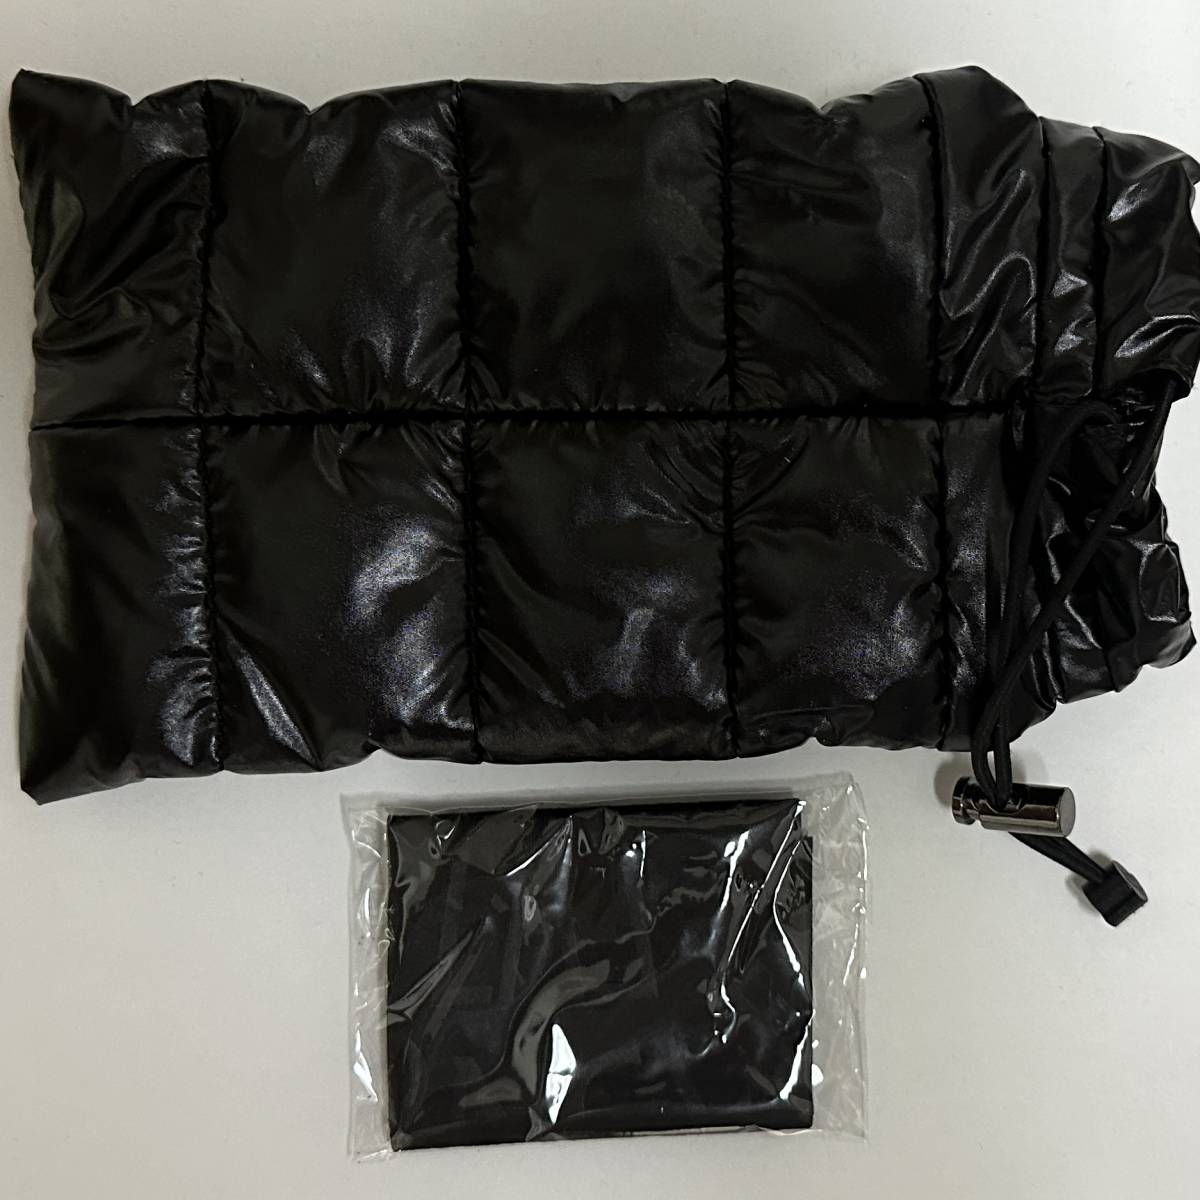 Moncler メガネ 正規新品 モンクレール 黒色 スクエア 付属品付き ML5003 V 001 イタリア製_画像10